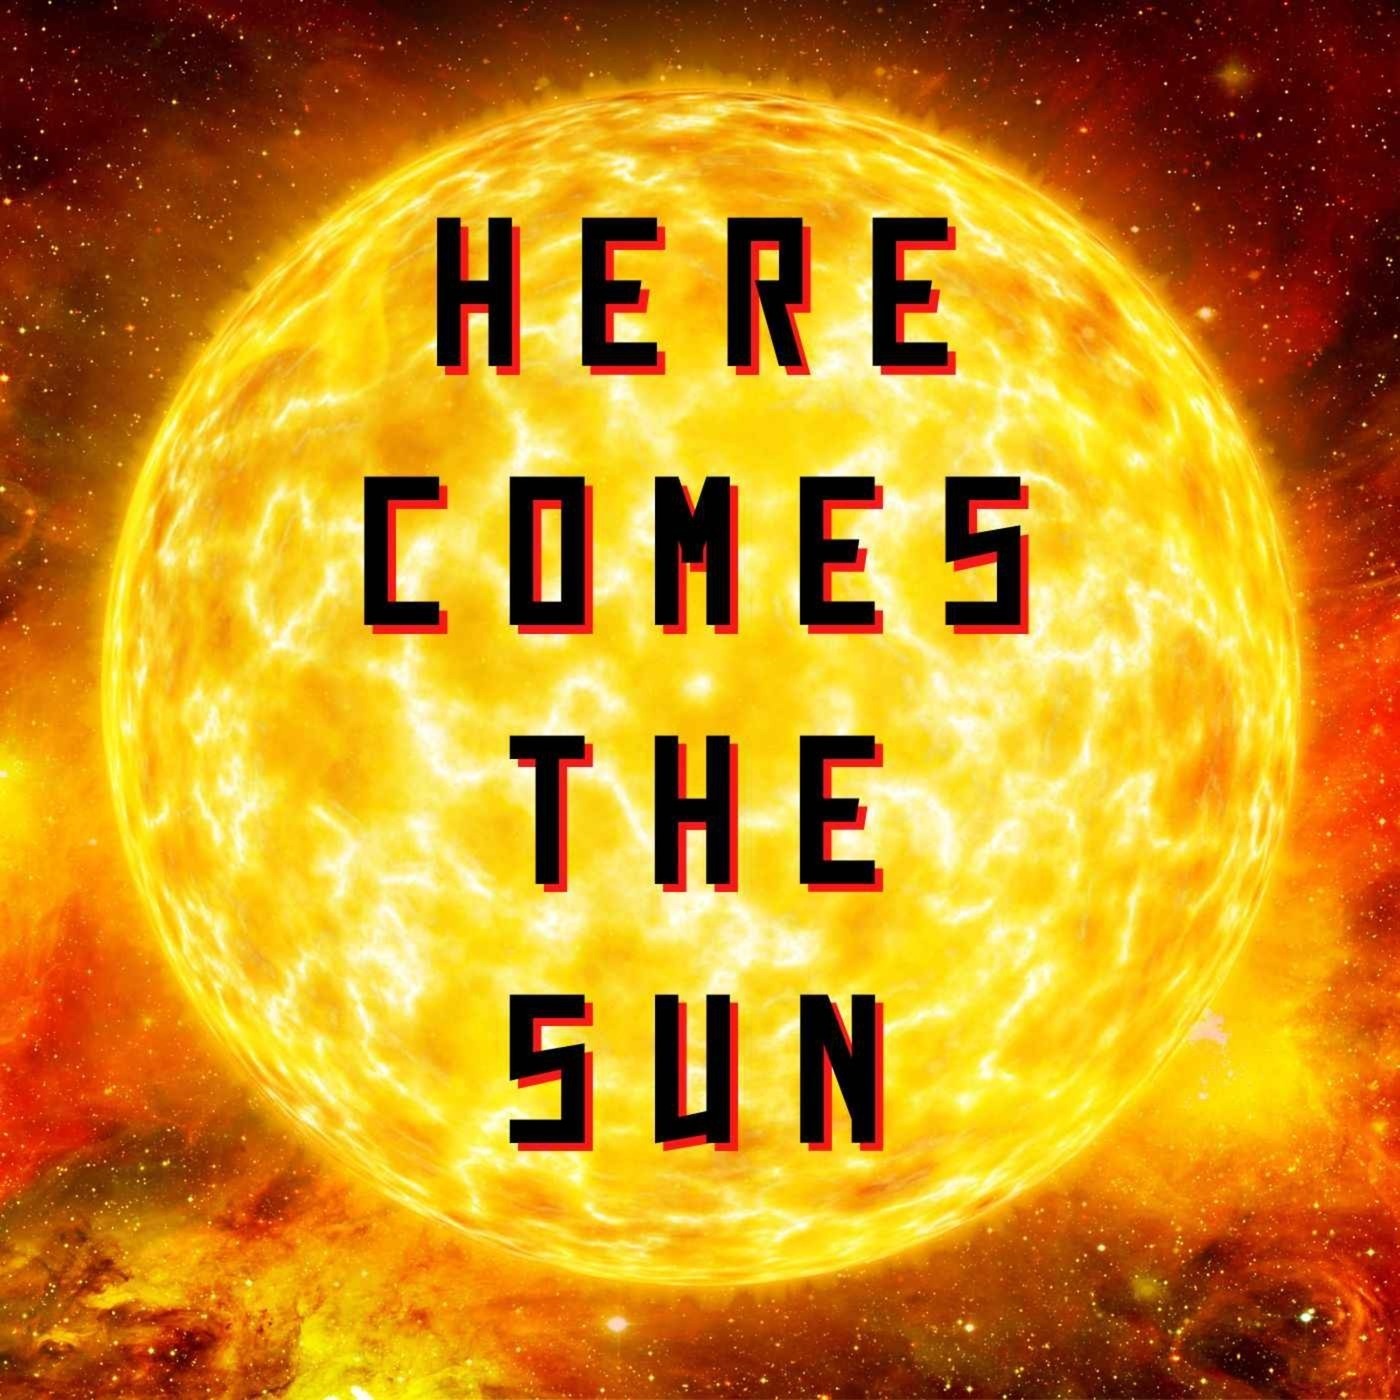 Ep. #508: HERE COMES THE SUN